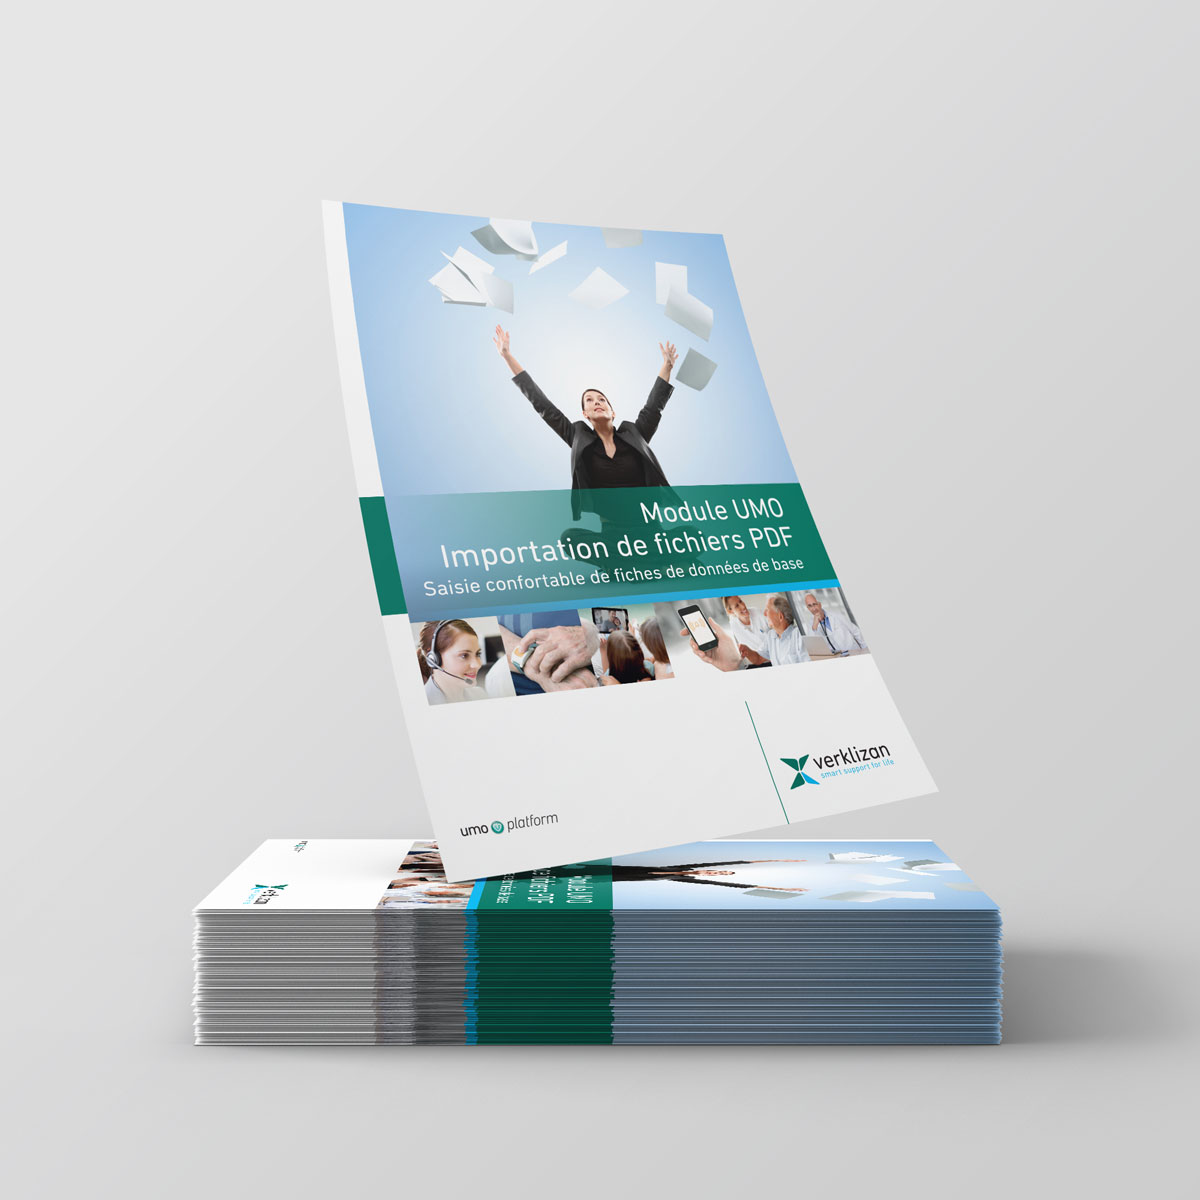 Leaflet design for Verklizan company. The picture shows one upright leaflet that is placed on top of many. In the picture of the flyer, there is a woman dressed in a business suit who is excitedly throwing papers in the air. Behind her is the blue sky. In the contrast of the blue color, there is a green strip in the middle of the page with all the information, and at the bottom a strip with more small photos and at the bottom a white area with the company logo.